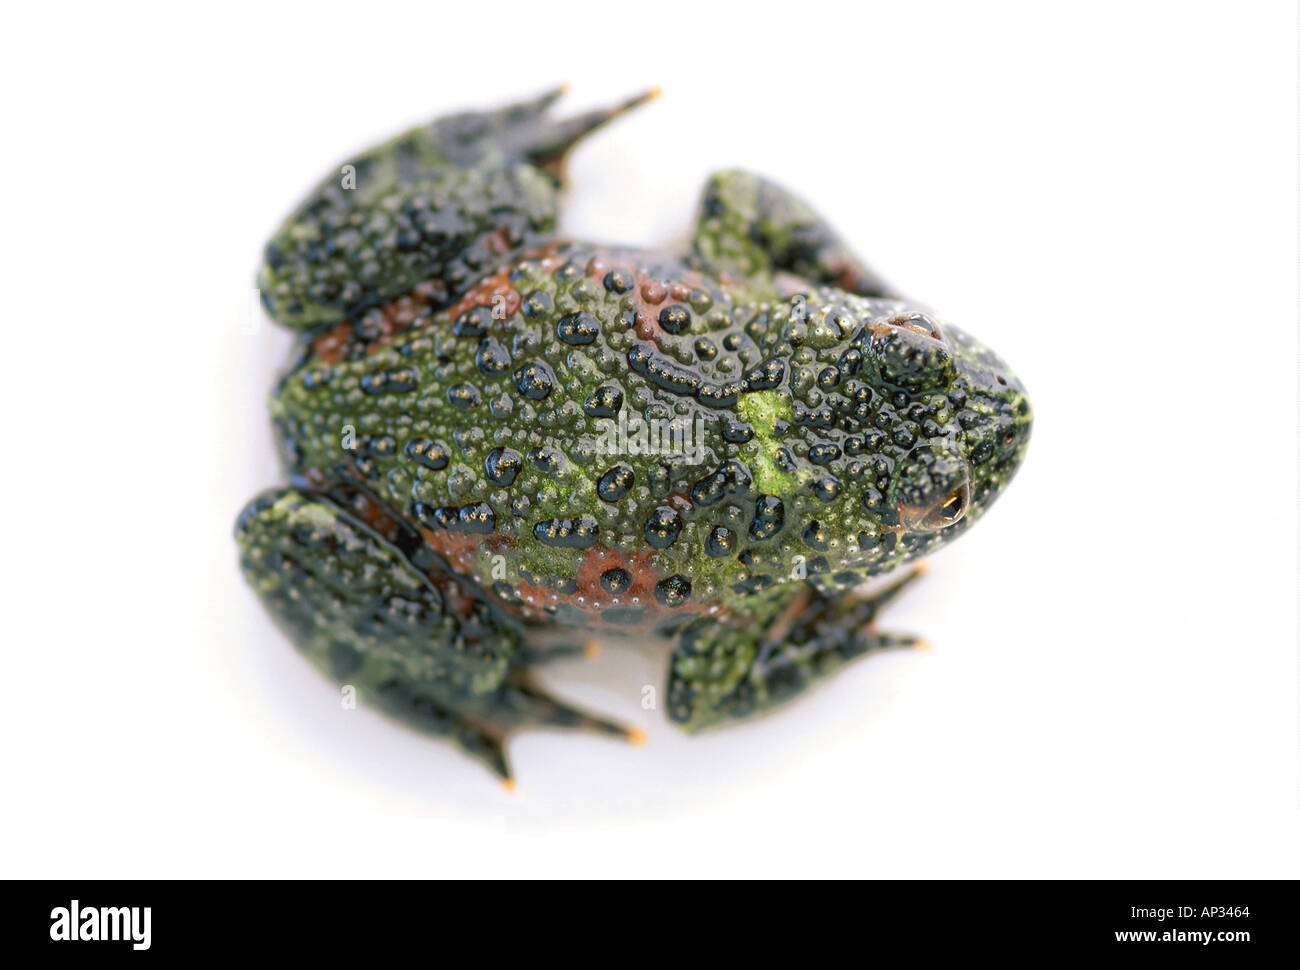 Firebelly Toad Foto Stock